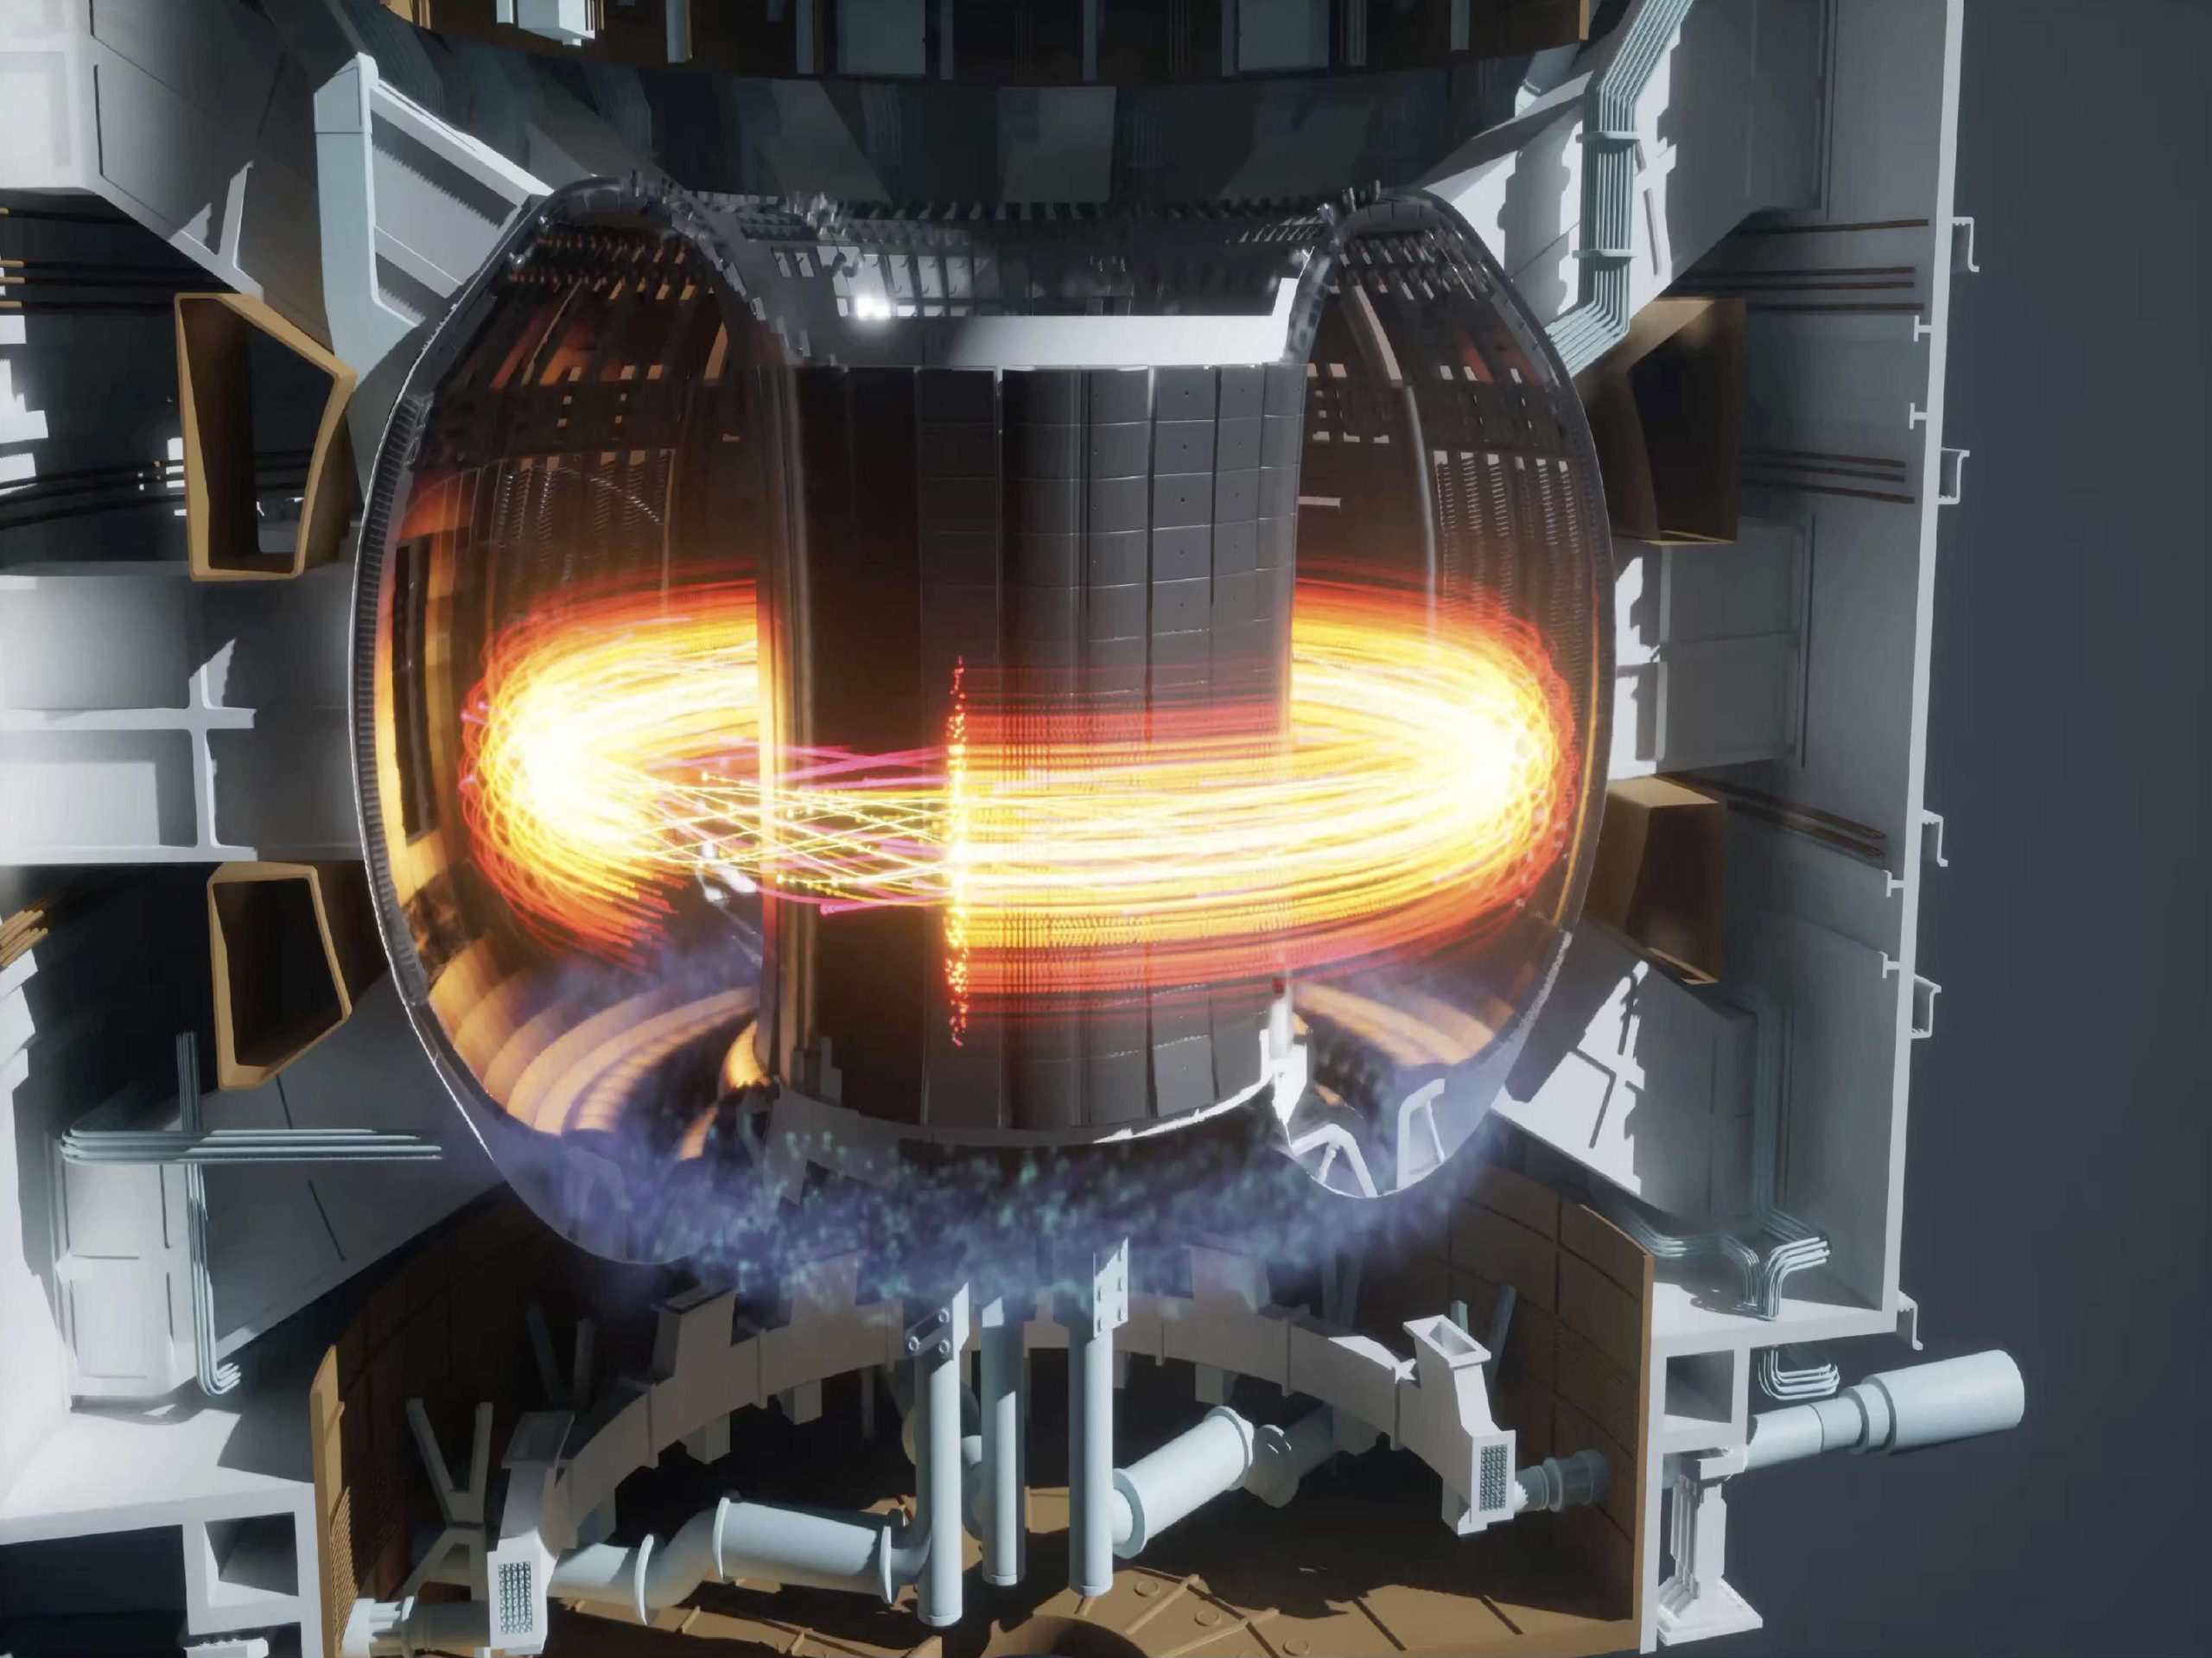 harnessing-the-power-of-stars-epfl-s-30-year-odyssey-in-fusion-energy-research